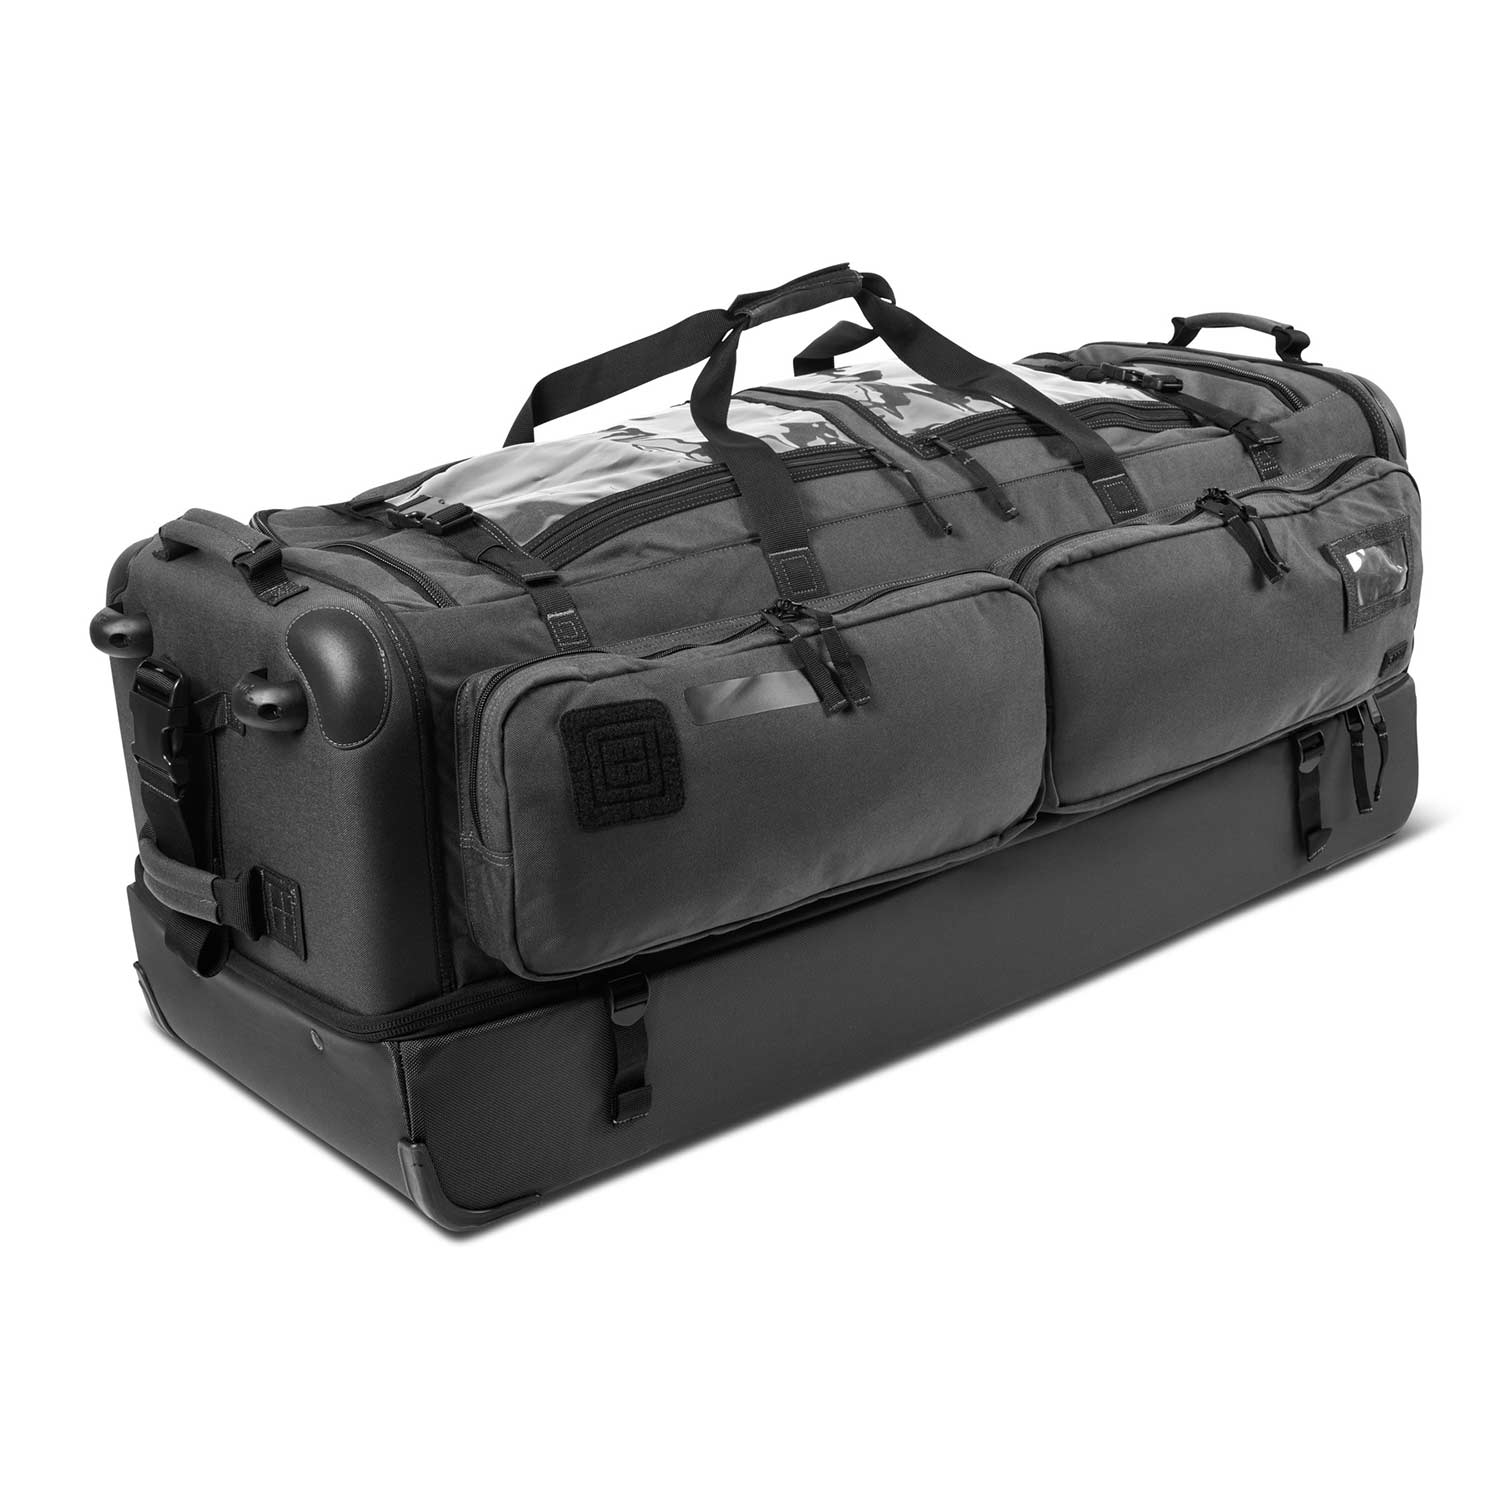 5.11 TACTICAL CAMS 3.0 ROLLING BAG